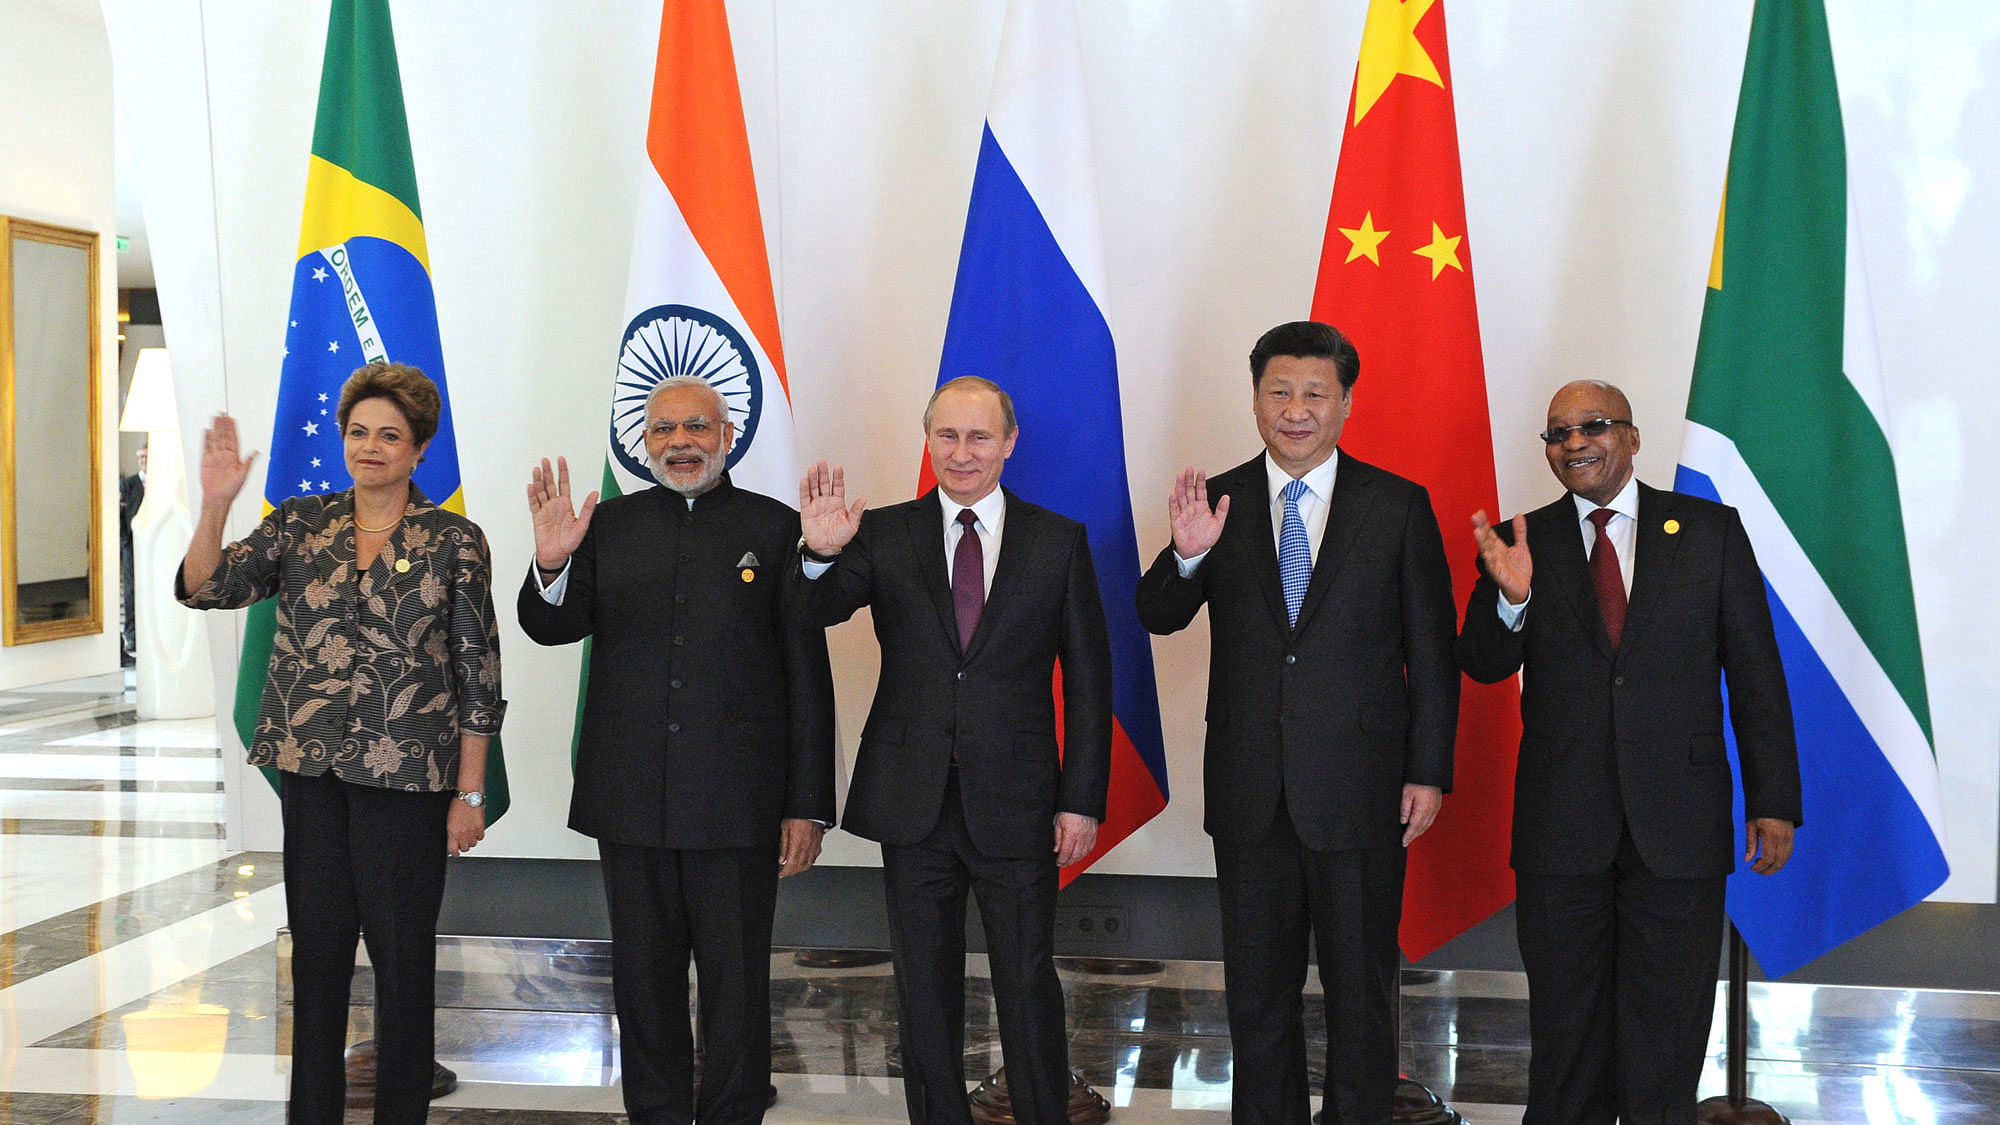 In a file photo, Narendra Modi (second from left) and other heads of state of BRICS countries.&nbsp;